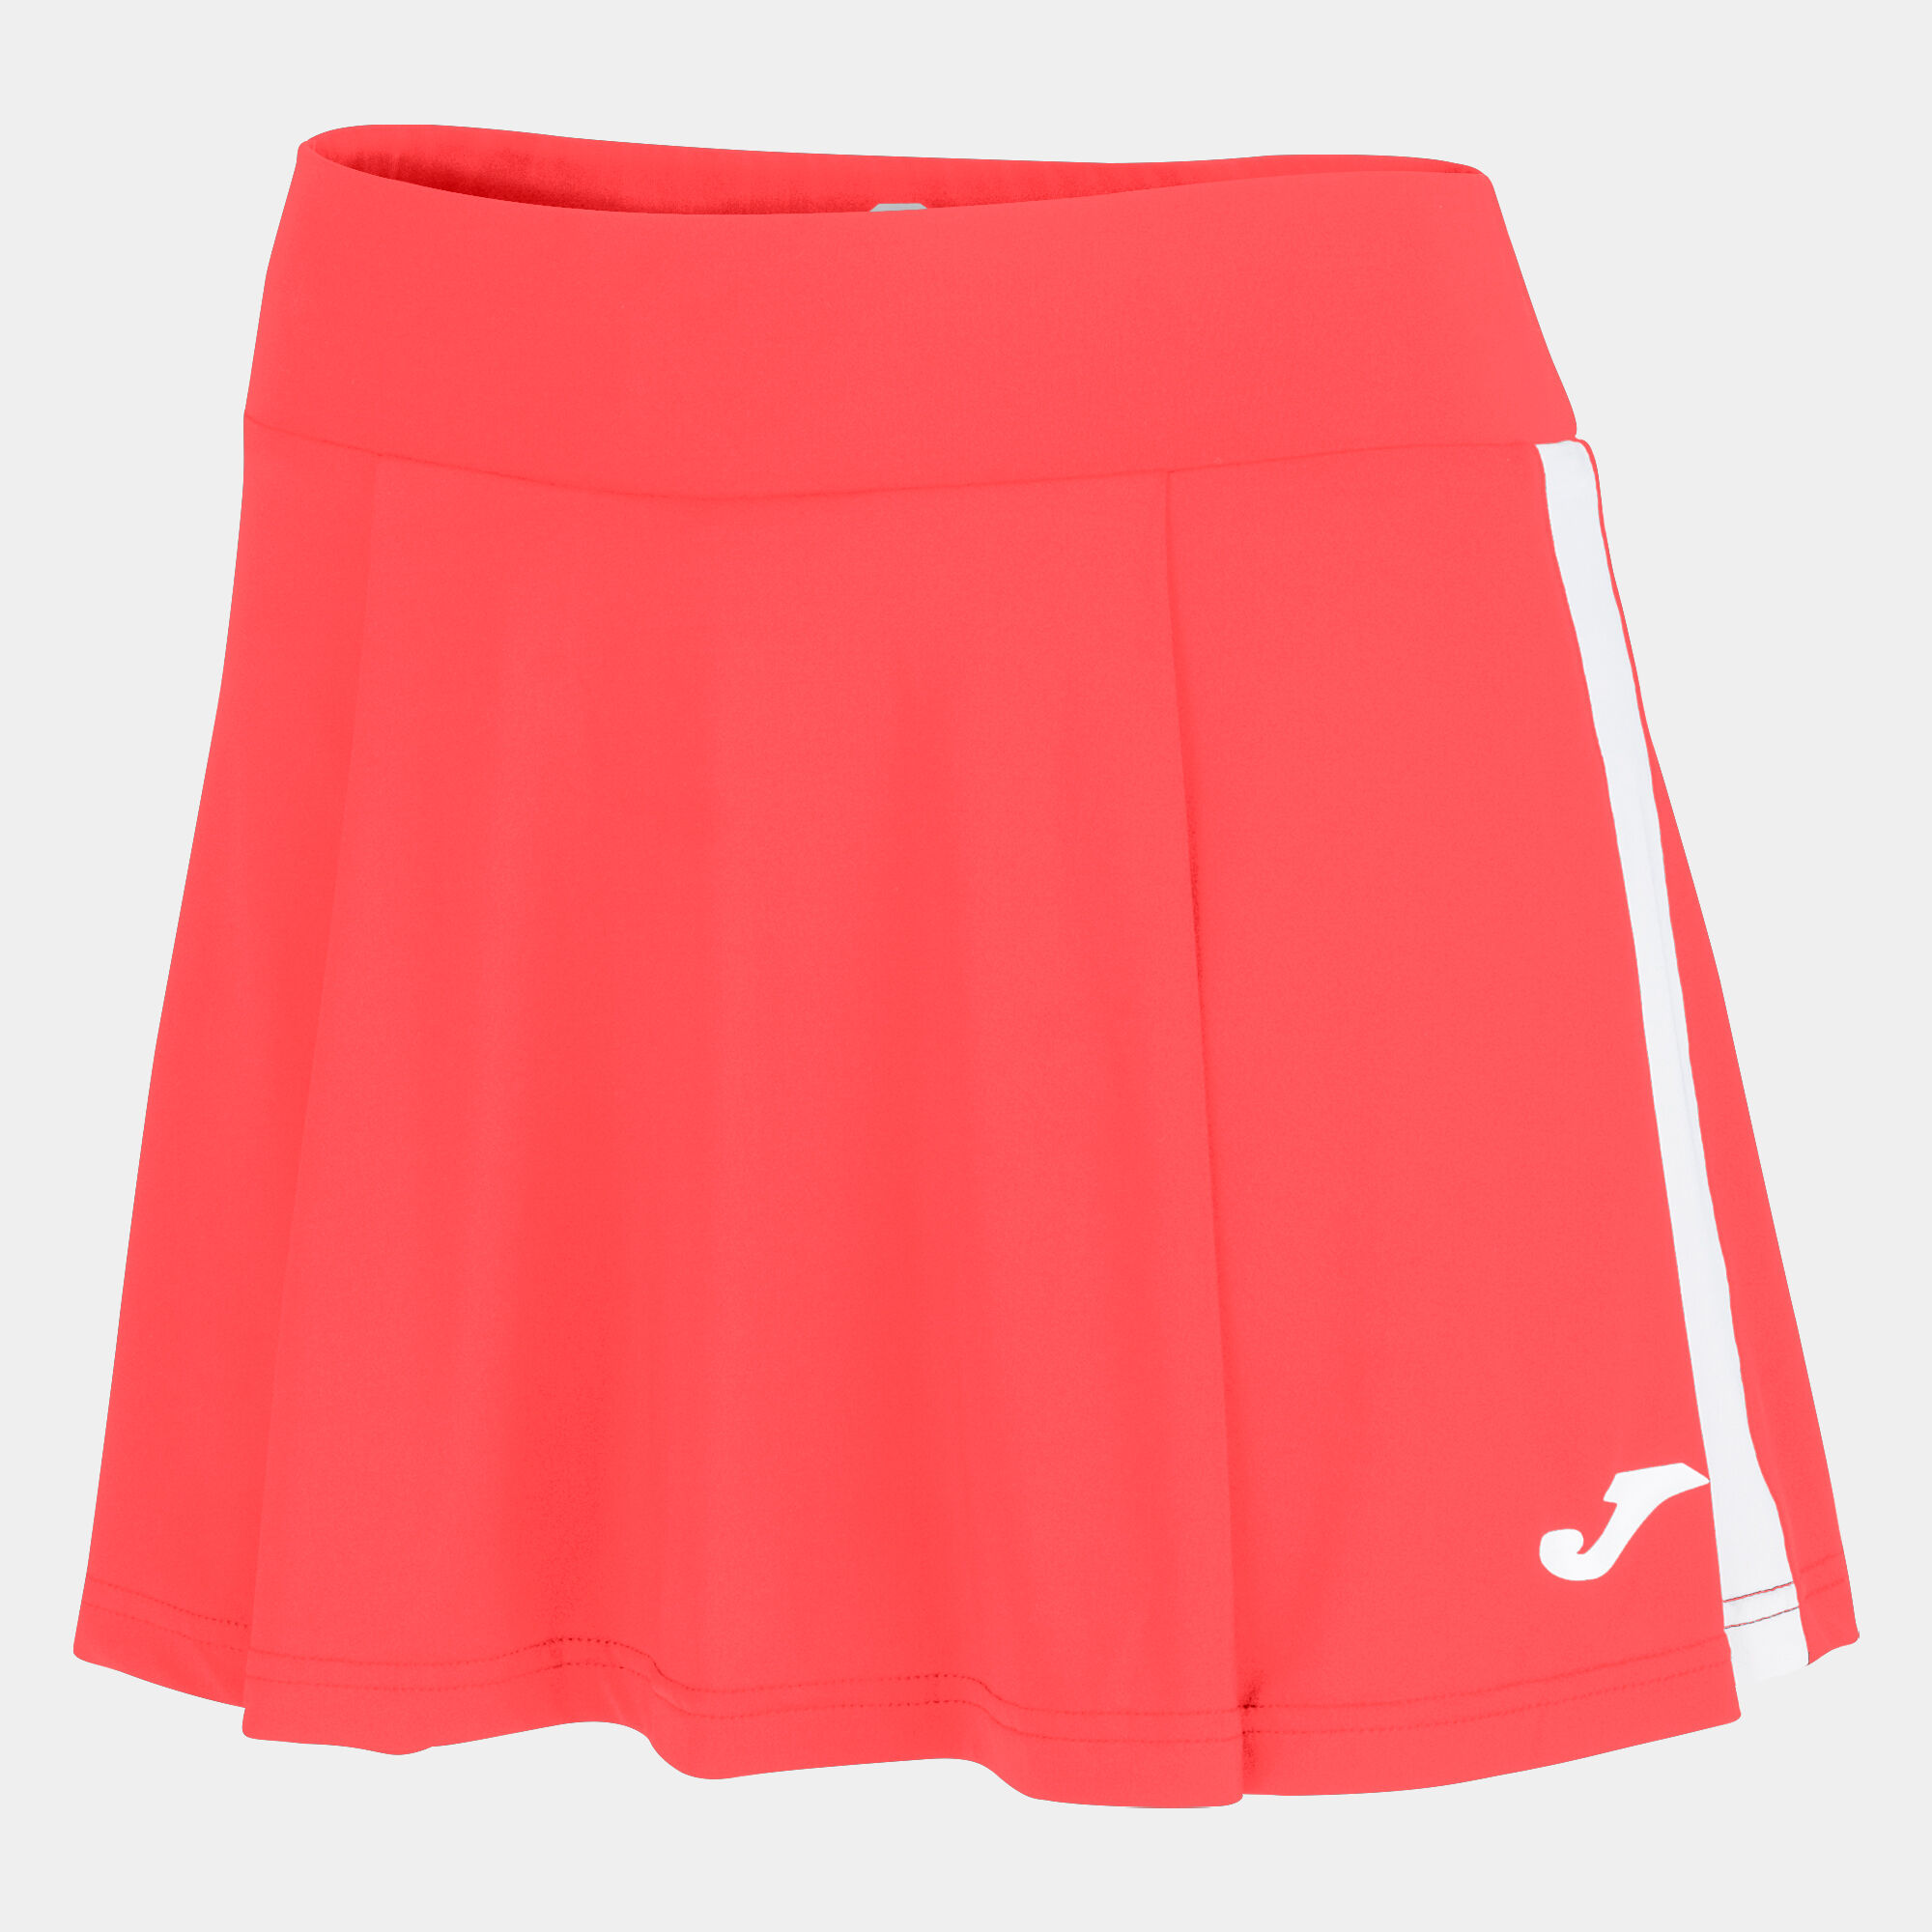 JUPE FEMME TORNEO CORAIL FLUO BLANC